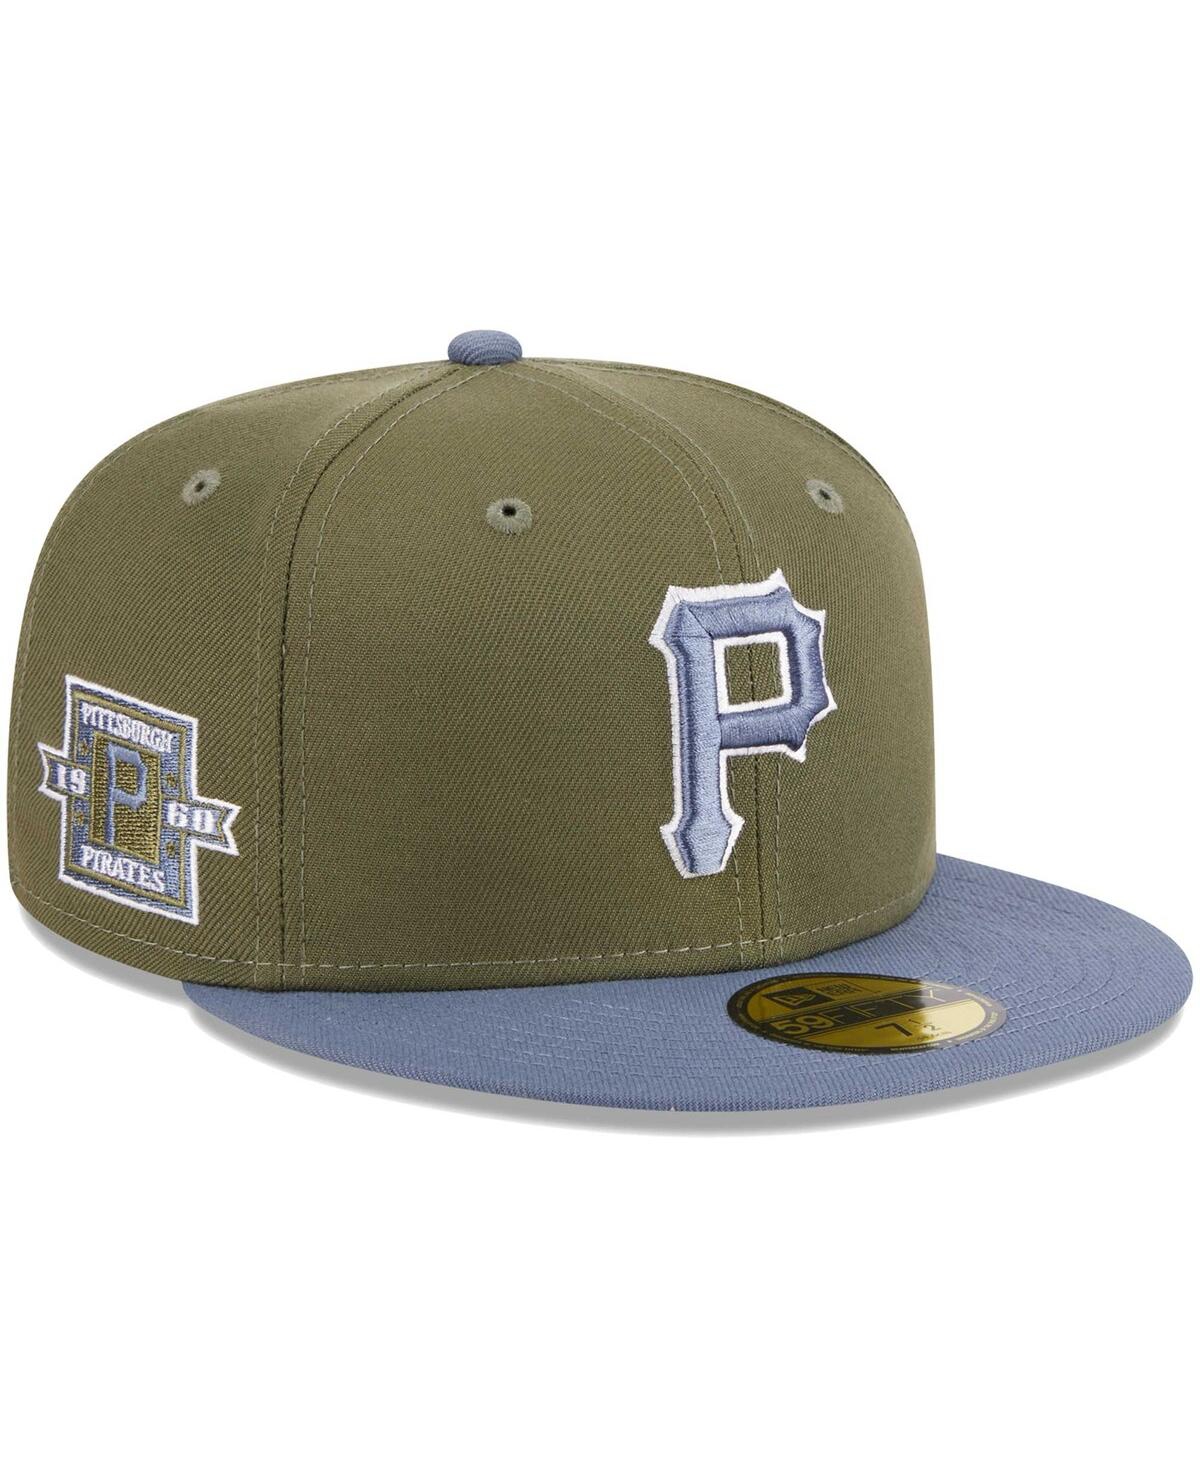 NEW ERA MEN'S NEW ERA OLIVE, BLUE PITTSBURGH PIRATES 59FIFTY FITTED HAT